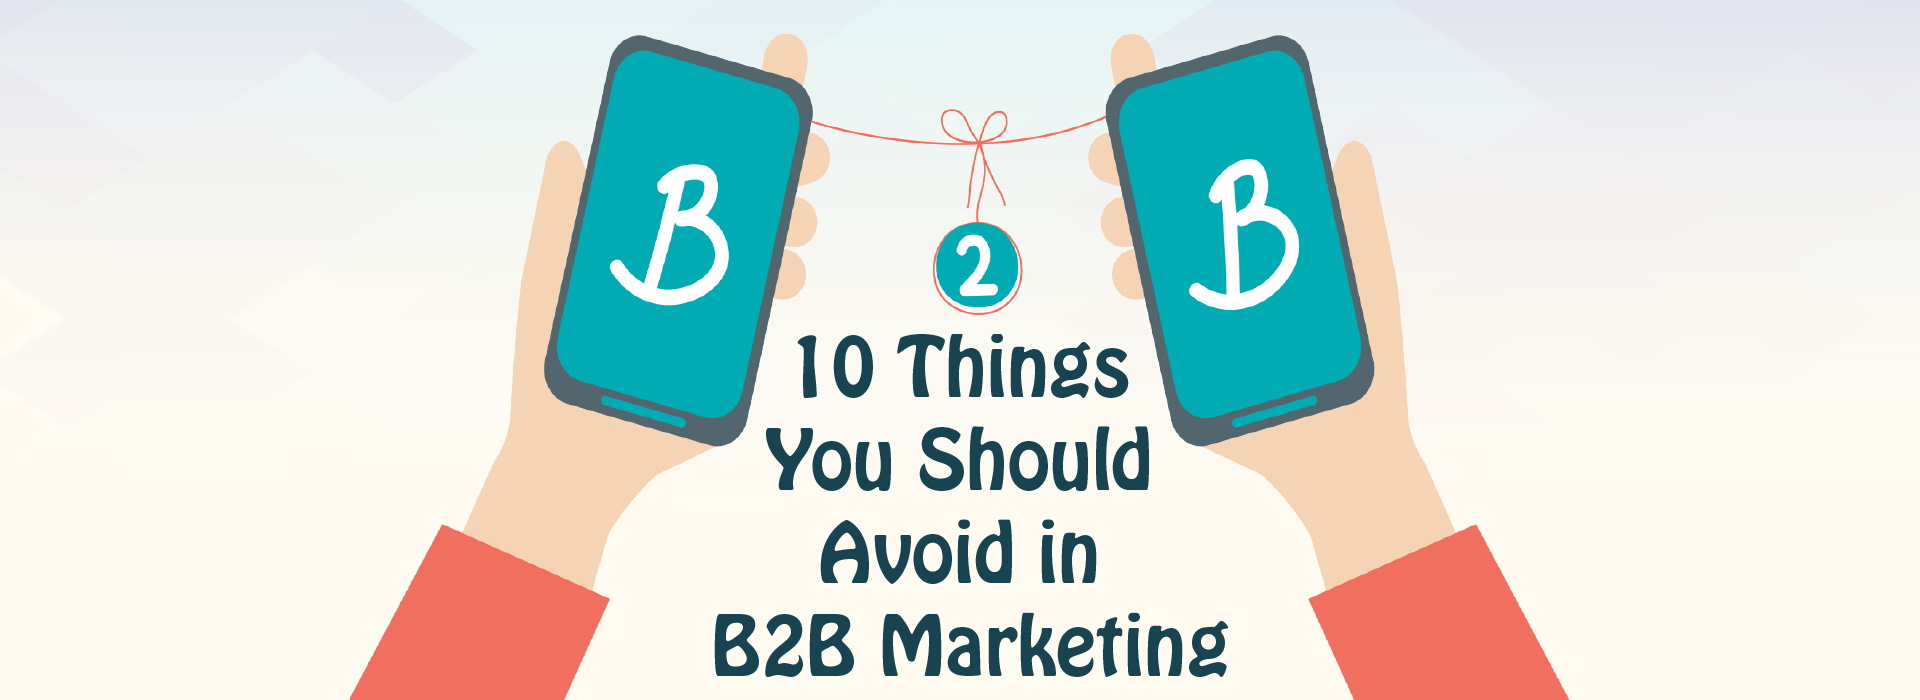 10 Things You Should Avoid in B2B Marketing